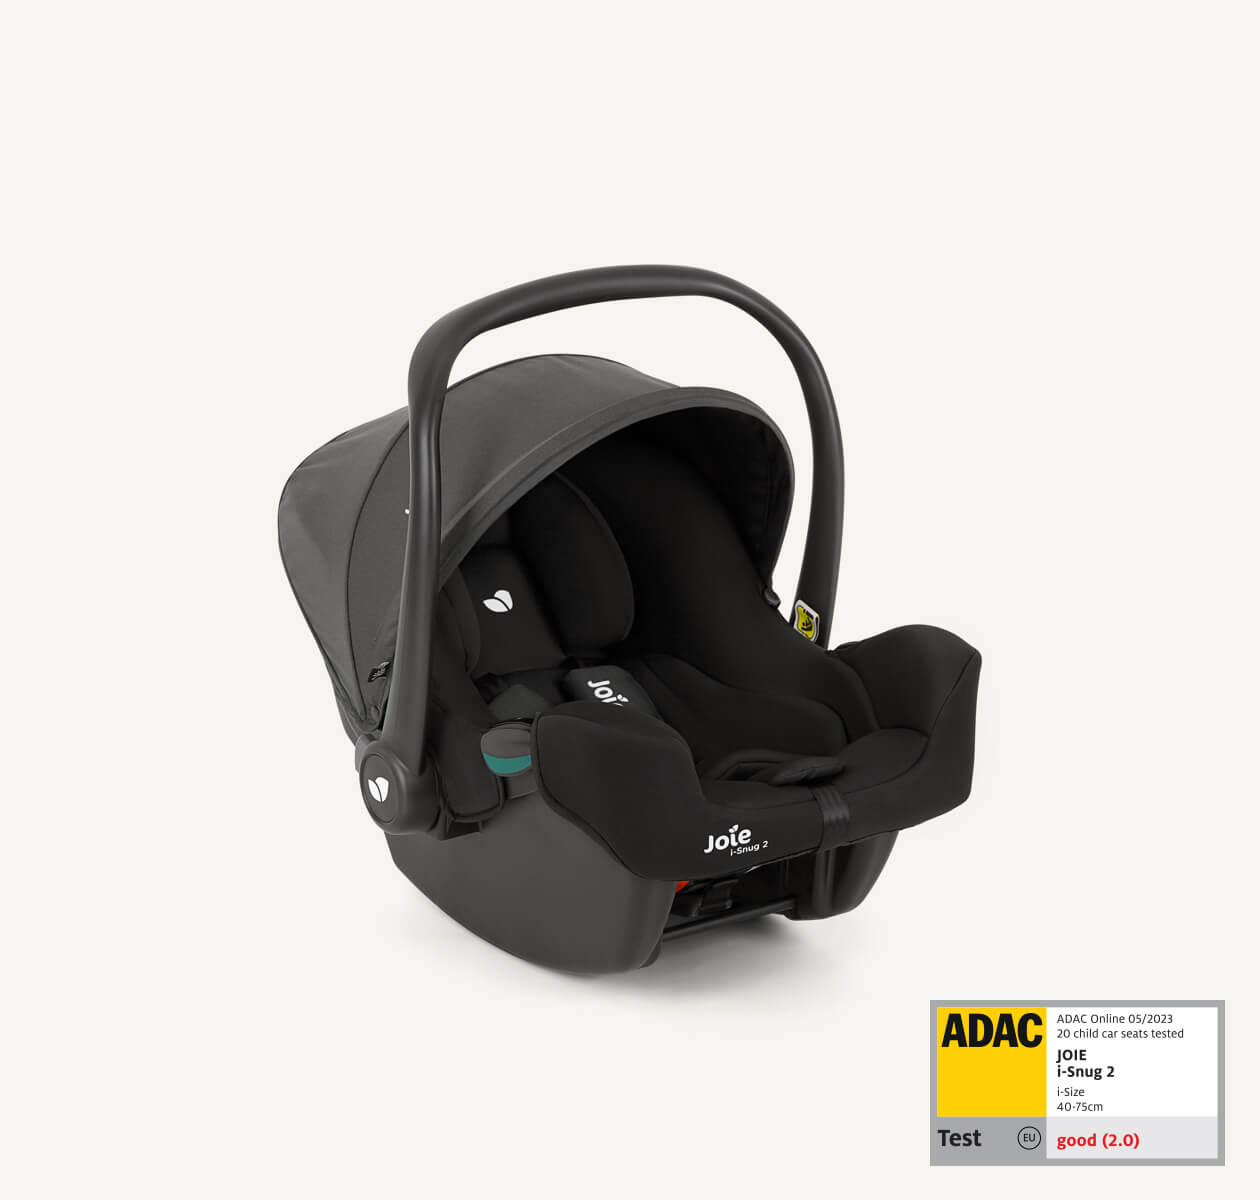 Joie i-Spin 360 i-Size Rotating Car Seat - Grey Flannel – UK Baby Centre